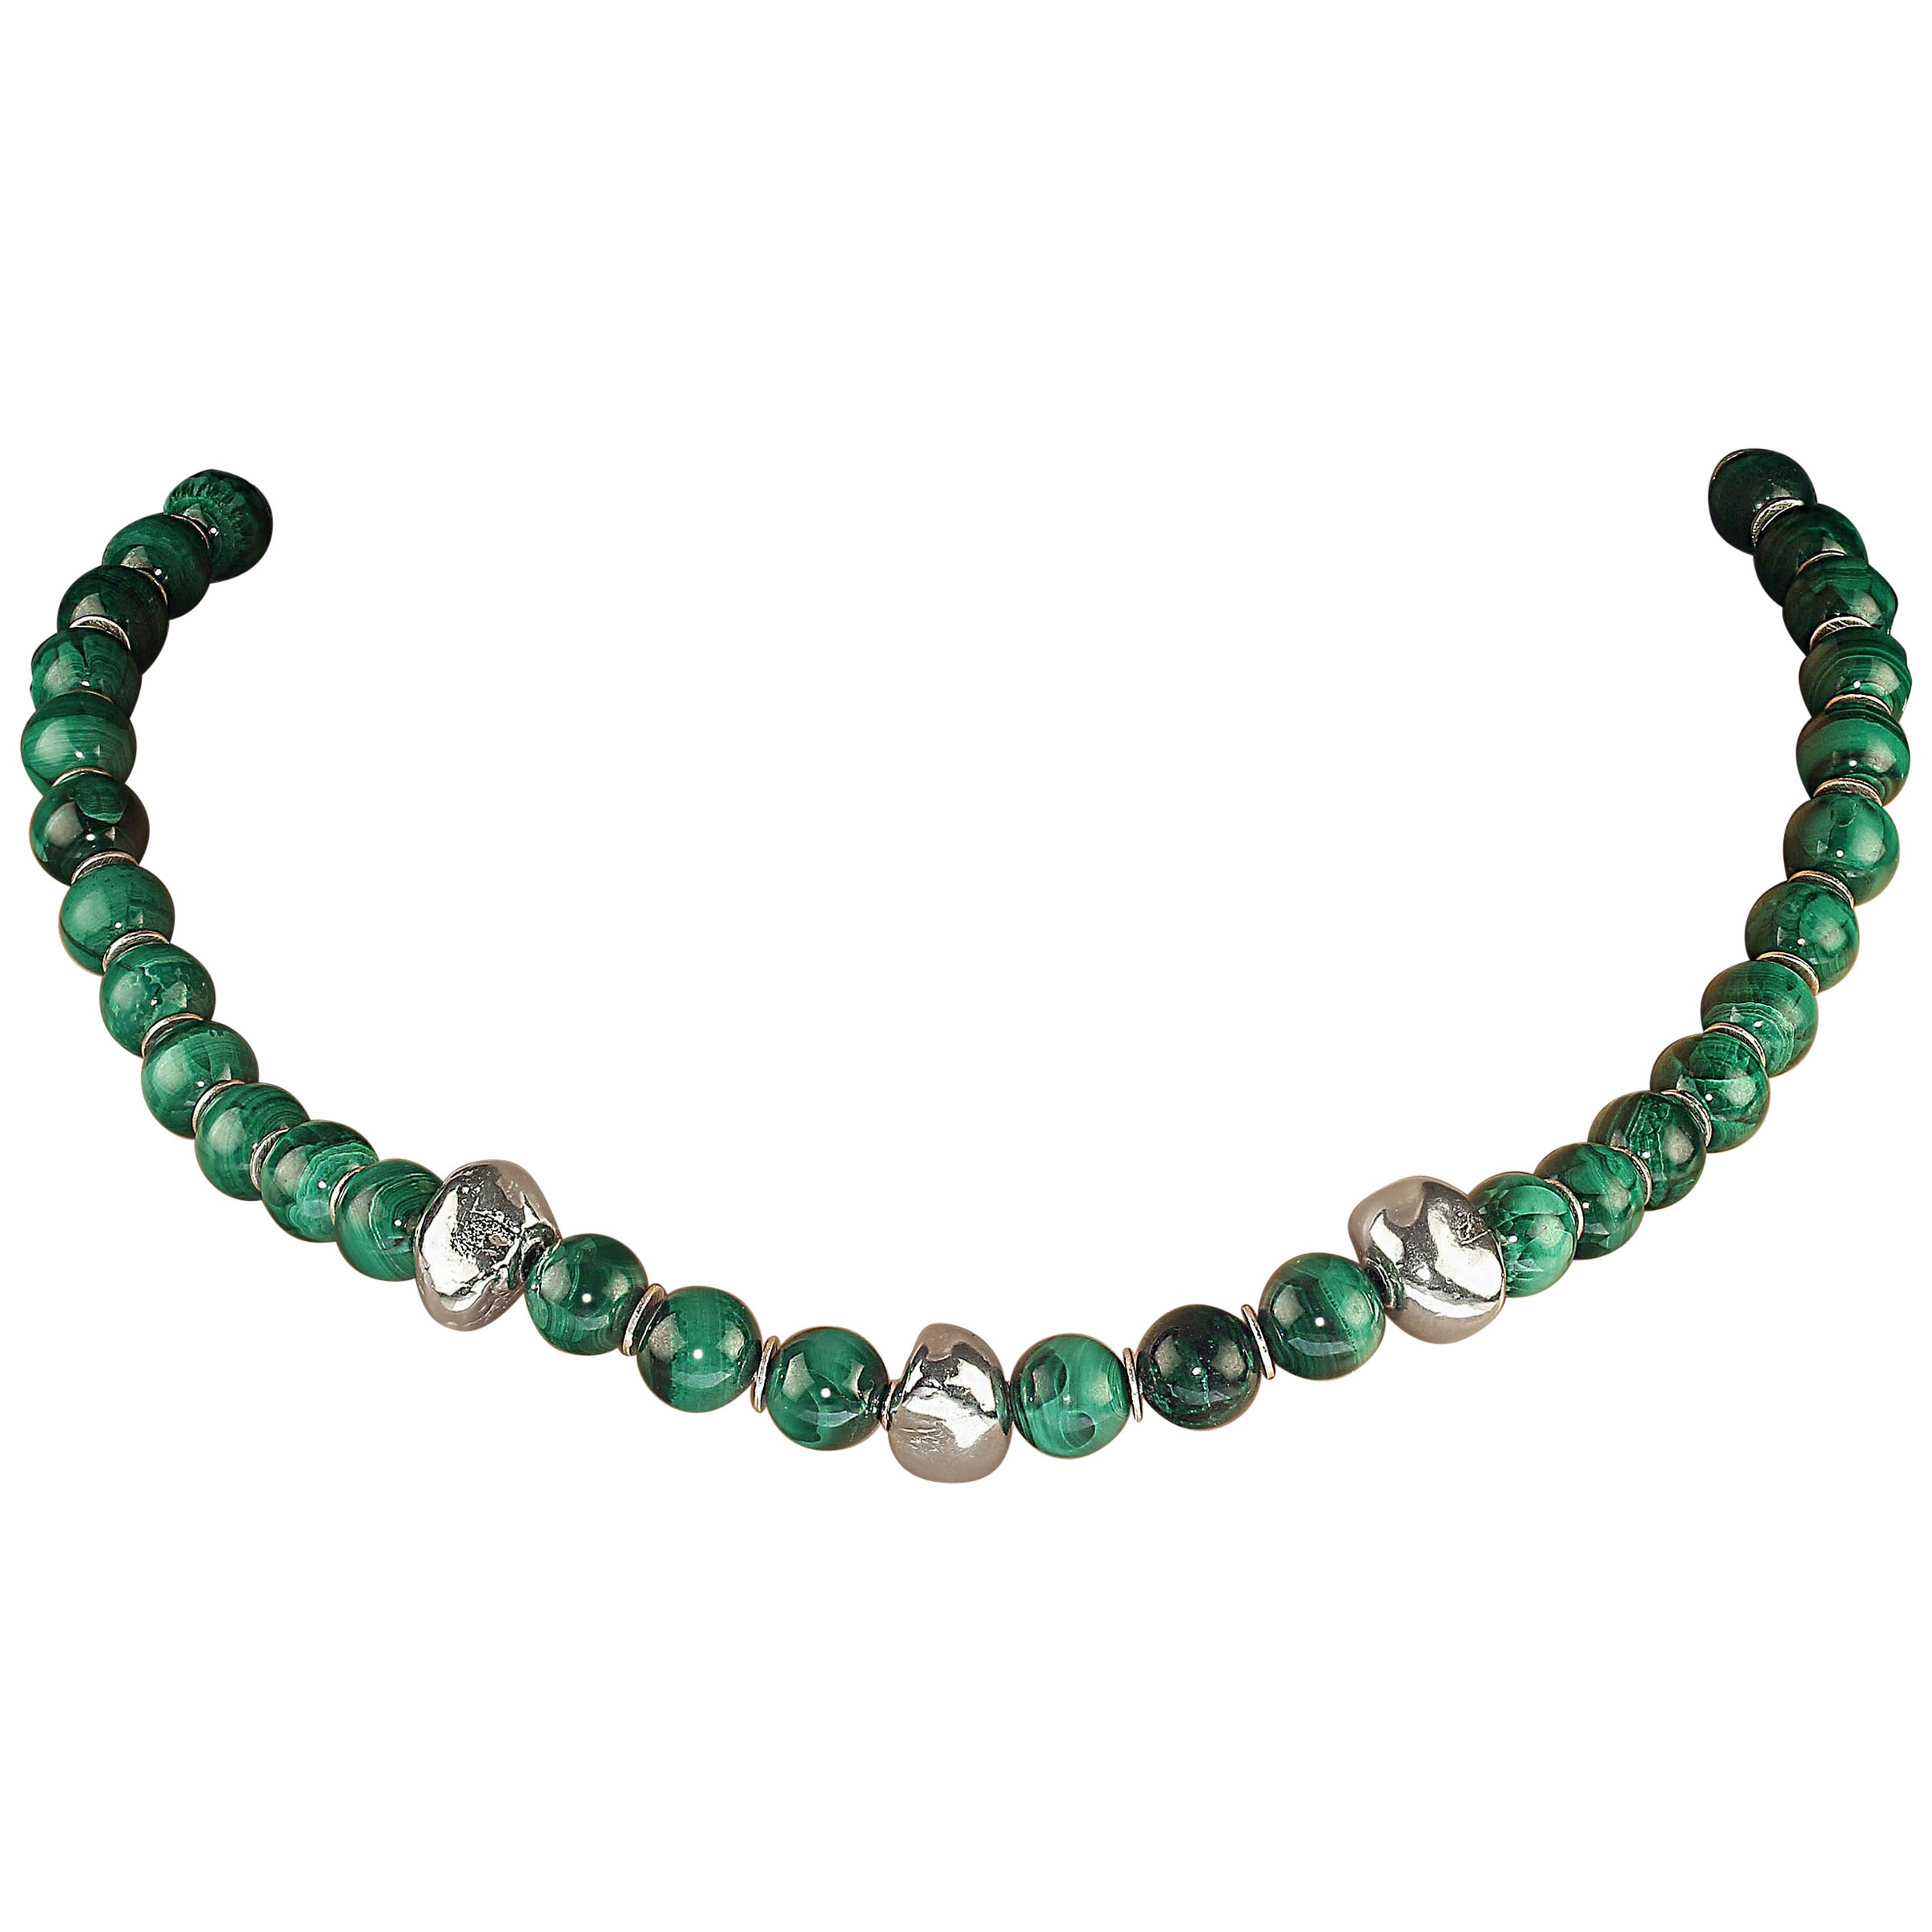 Gorgeous malachite necklace with three sterling silver focals across the center front.  These pebble like shiny sterling silver focals are somewhat larger than the 10 mm malachite beads so they really set off the front of the necklace.  The remainer